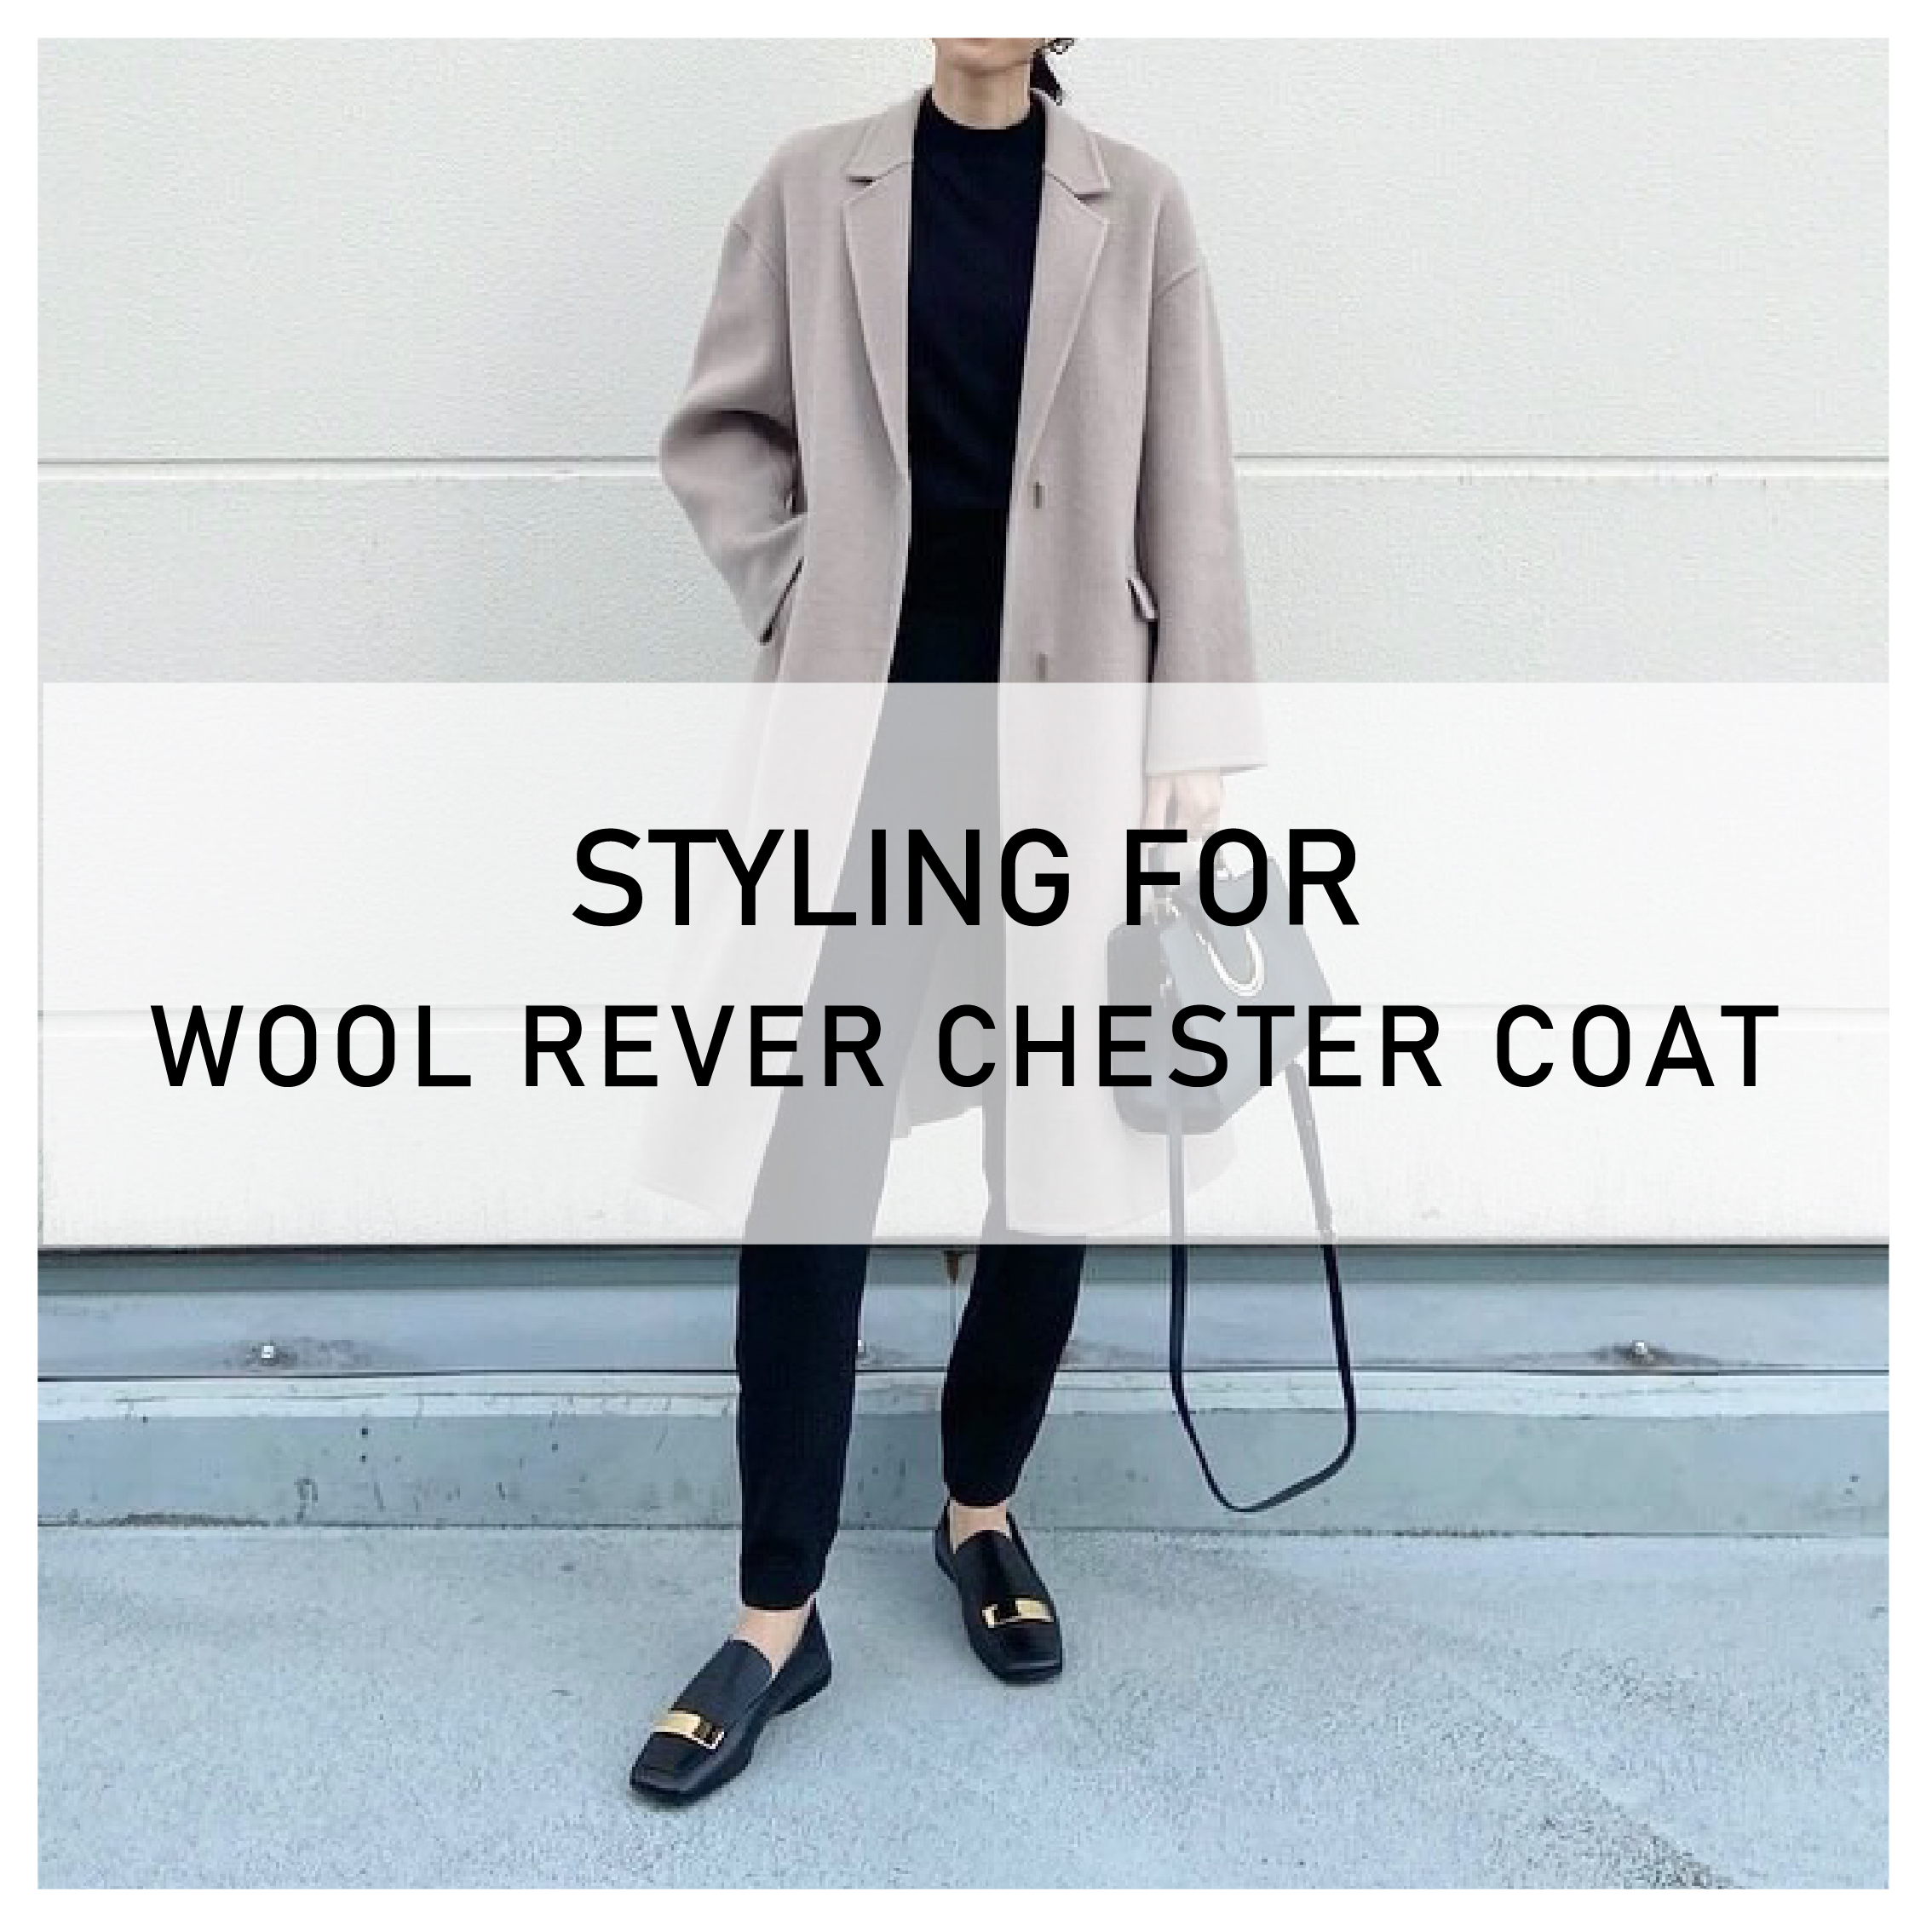 STYLING FOR WOOL